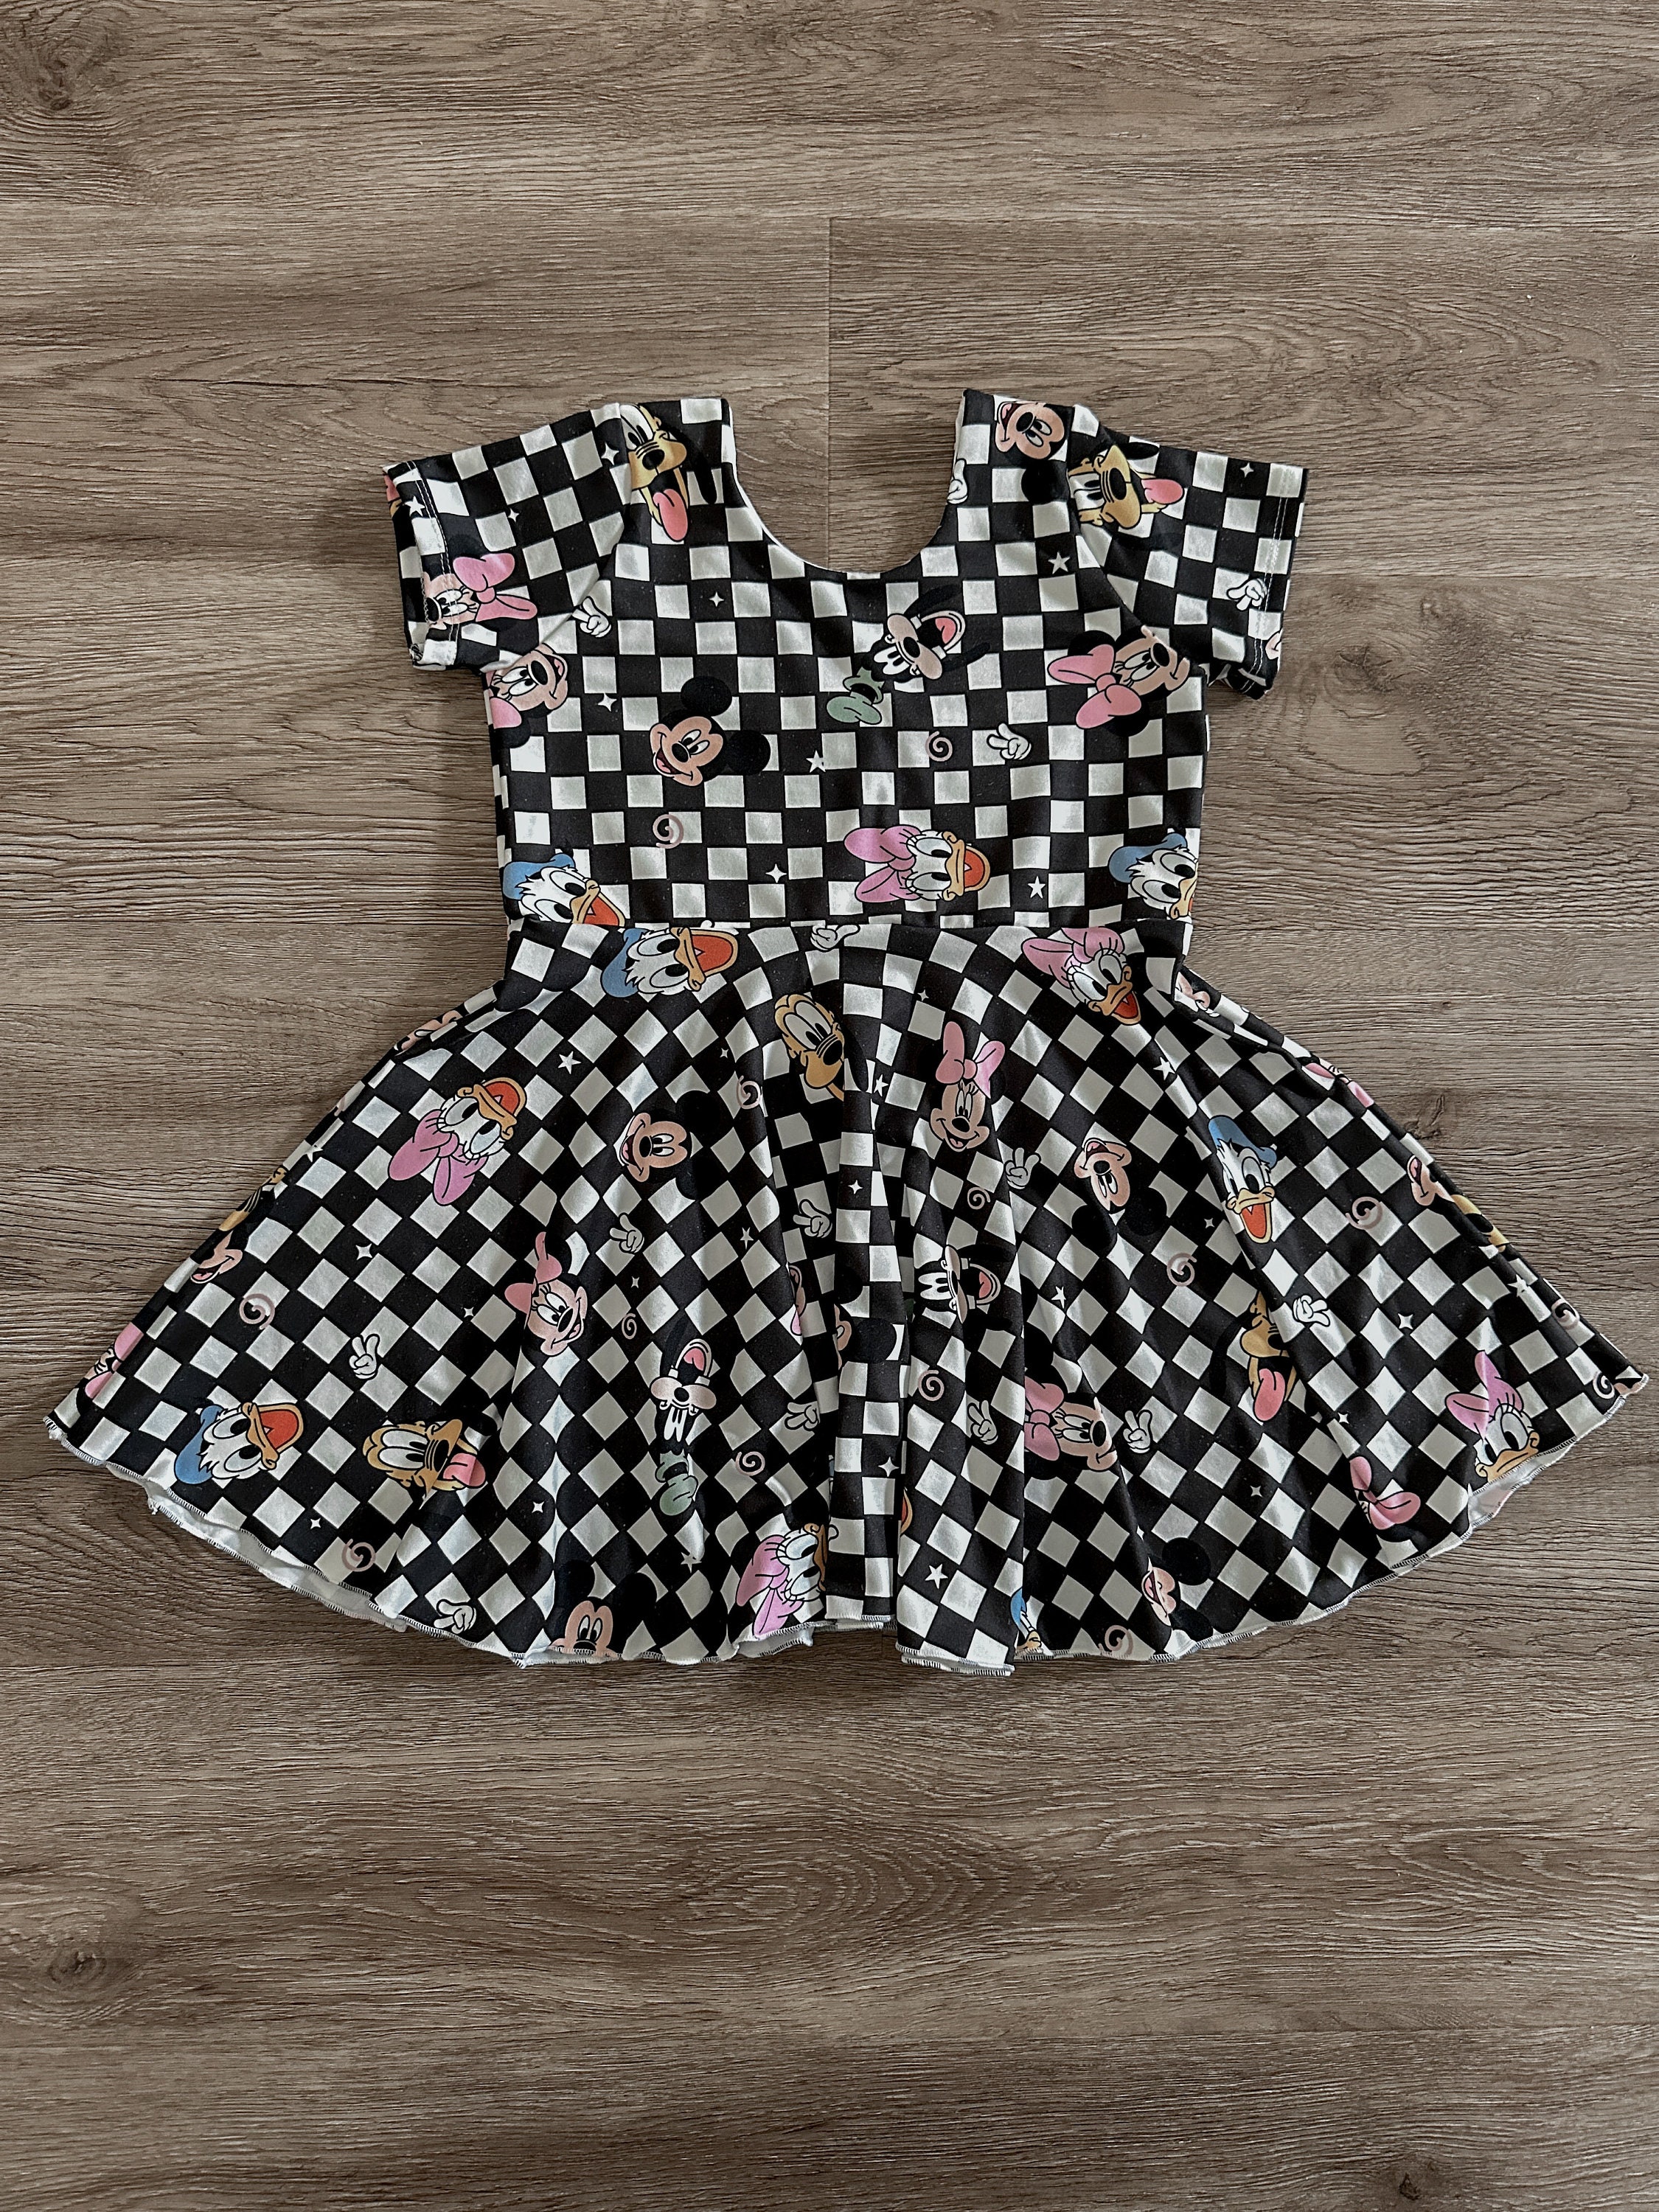 Discover 124+ black and white checkered dress best